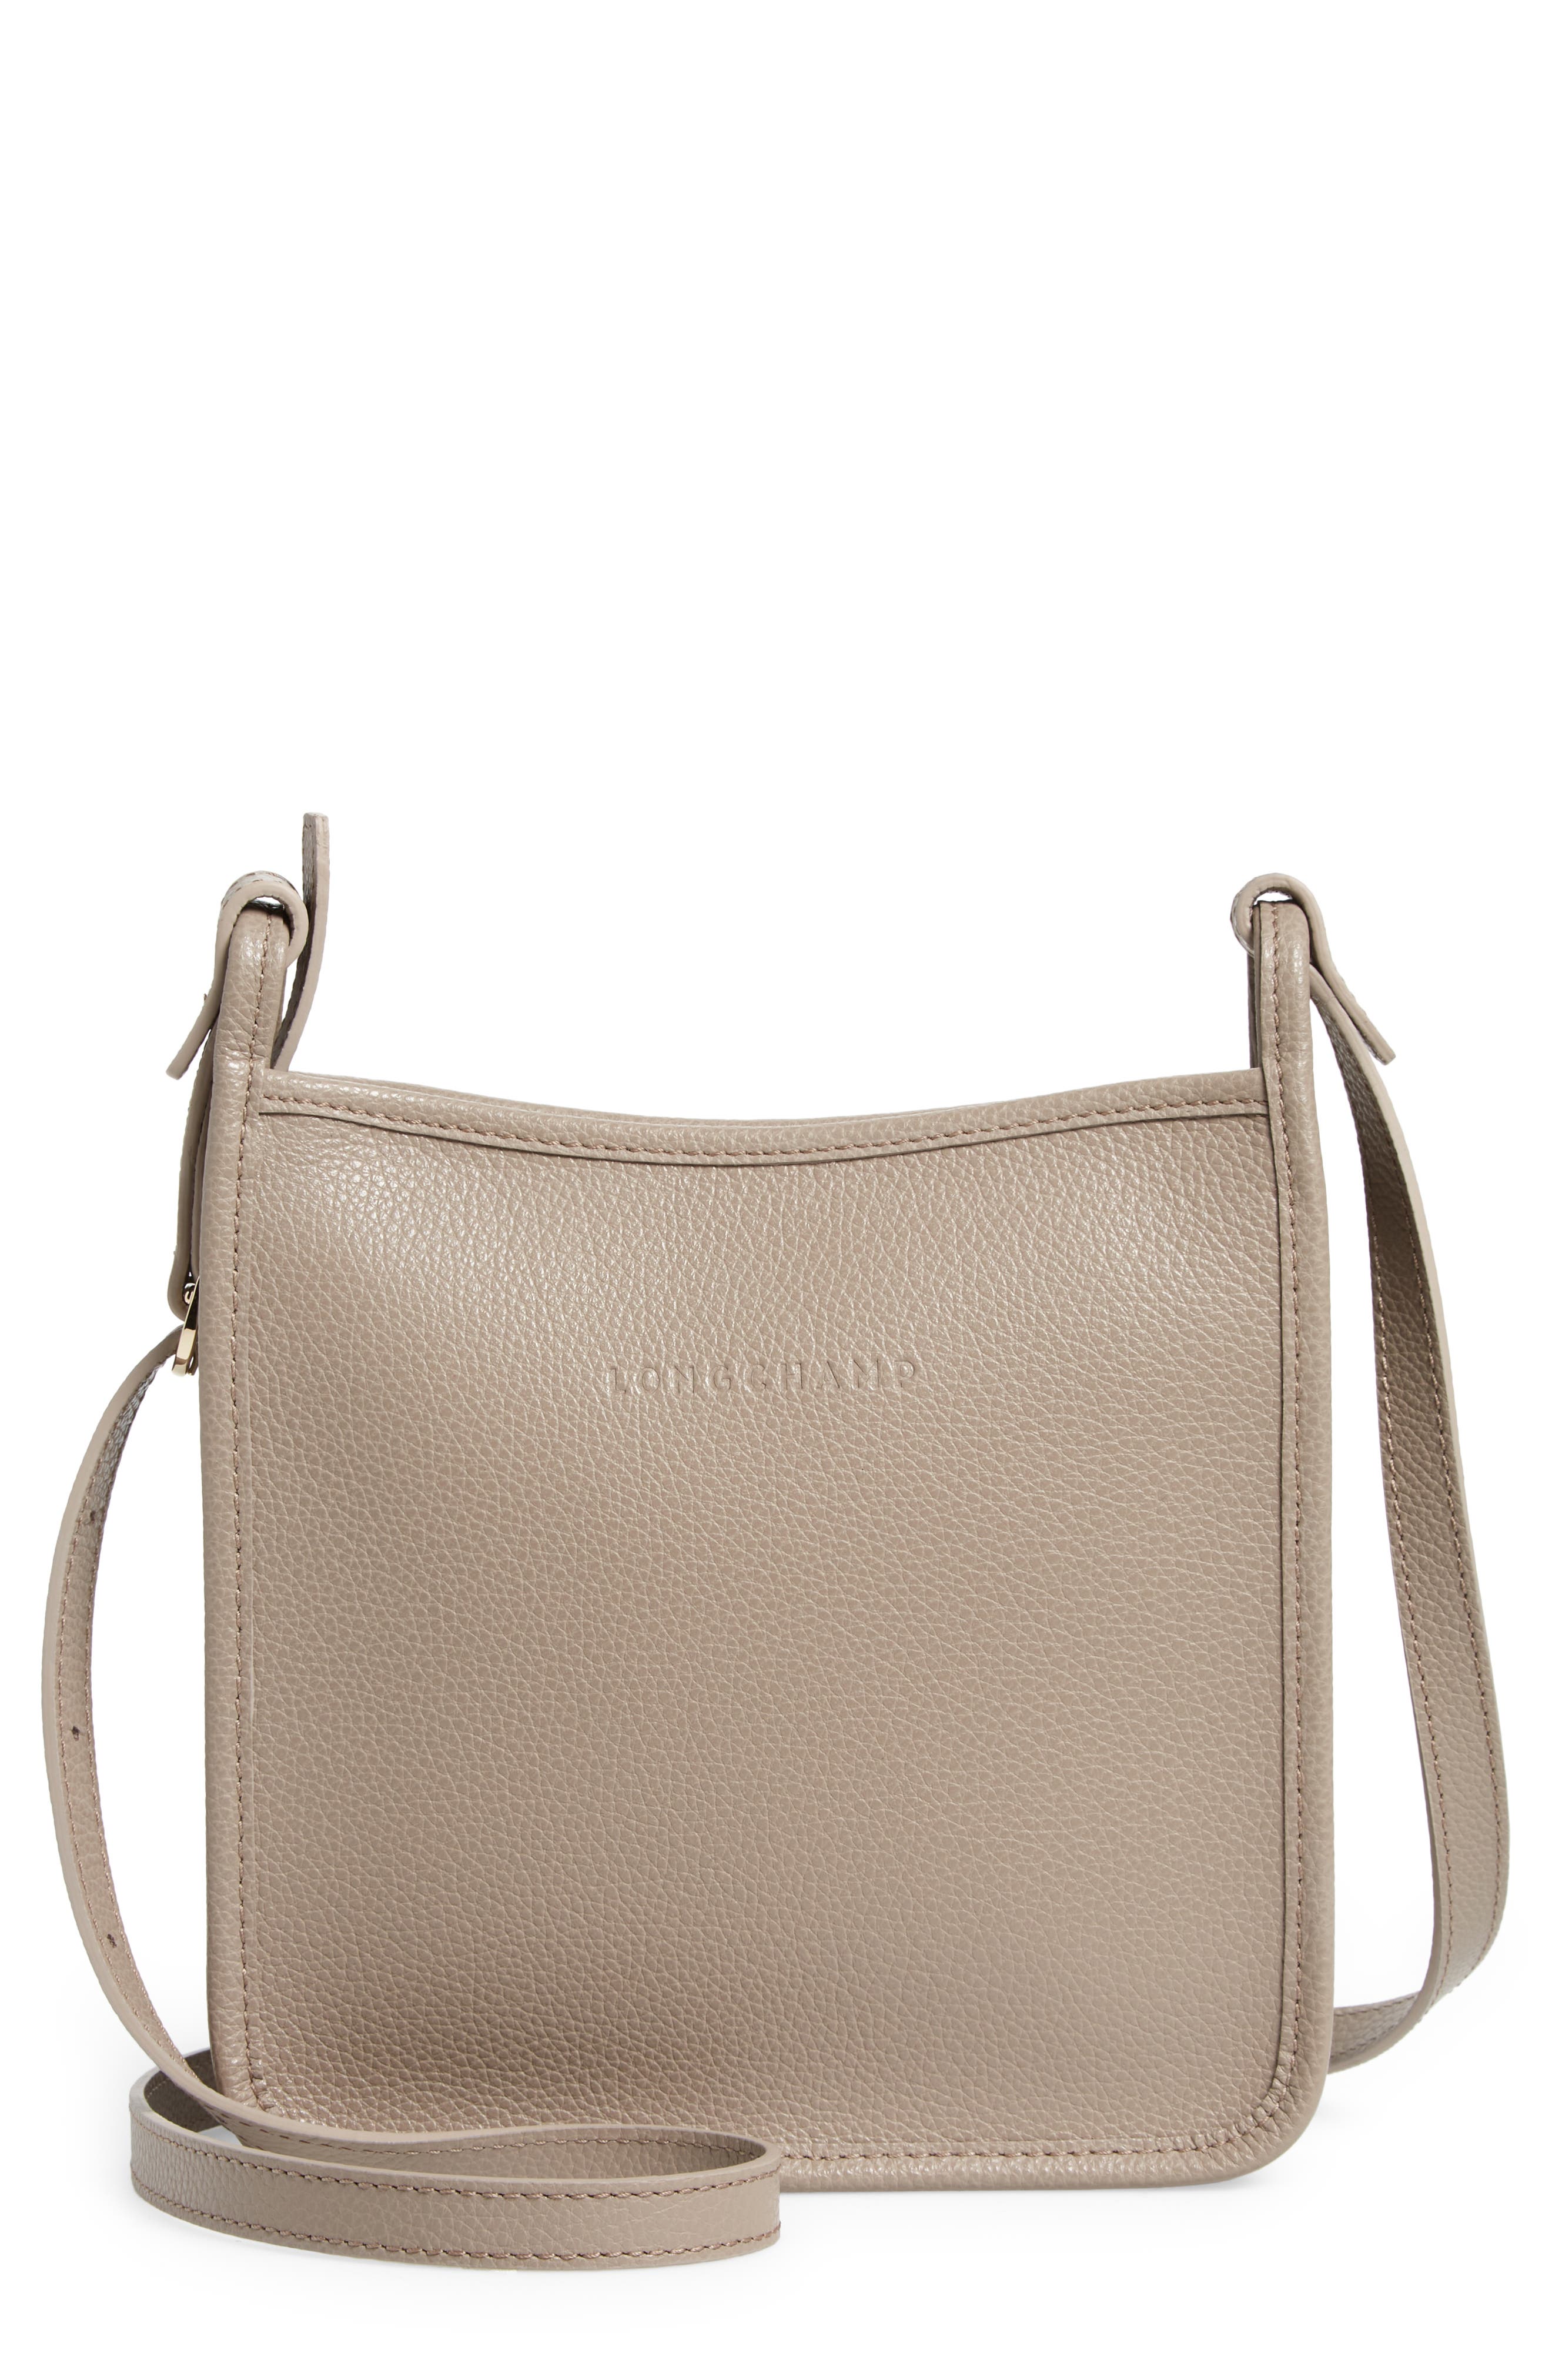 Longchamp Le Foulonne Small Crossbody Bag in Turtle Dove at Nordstrom